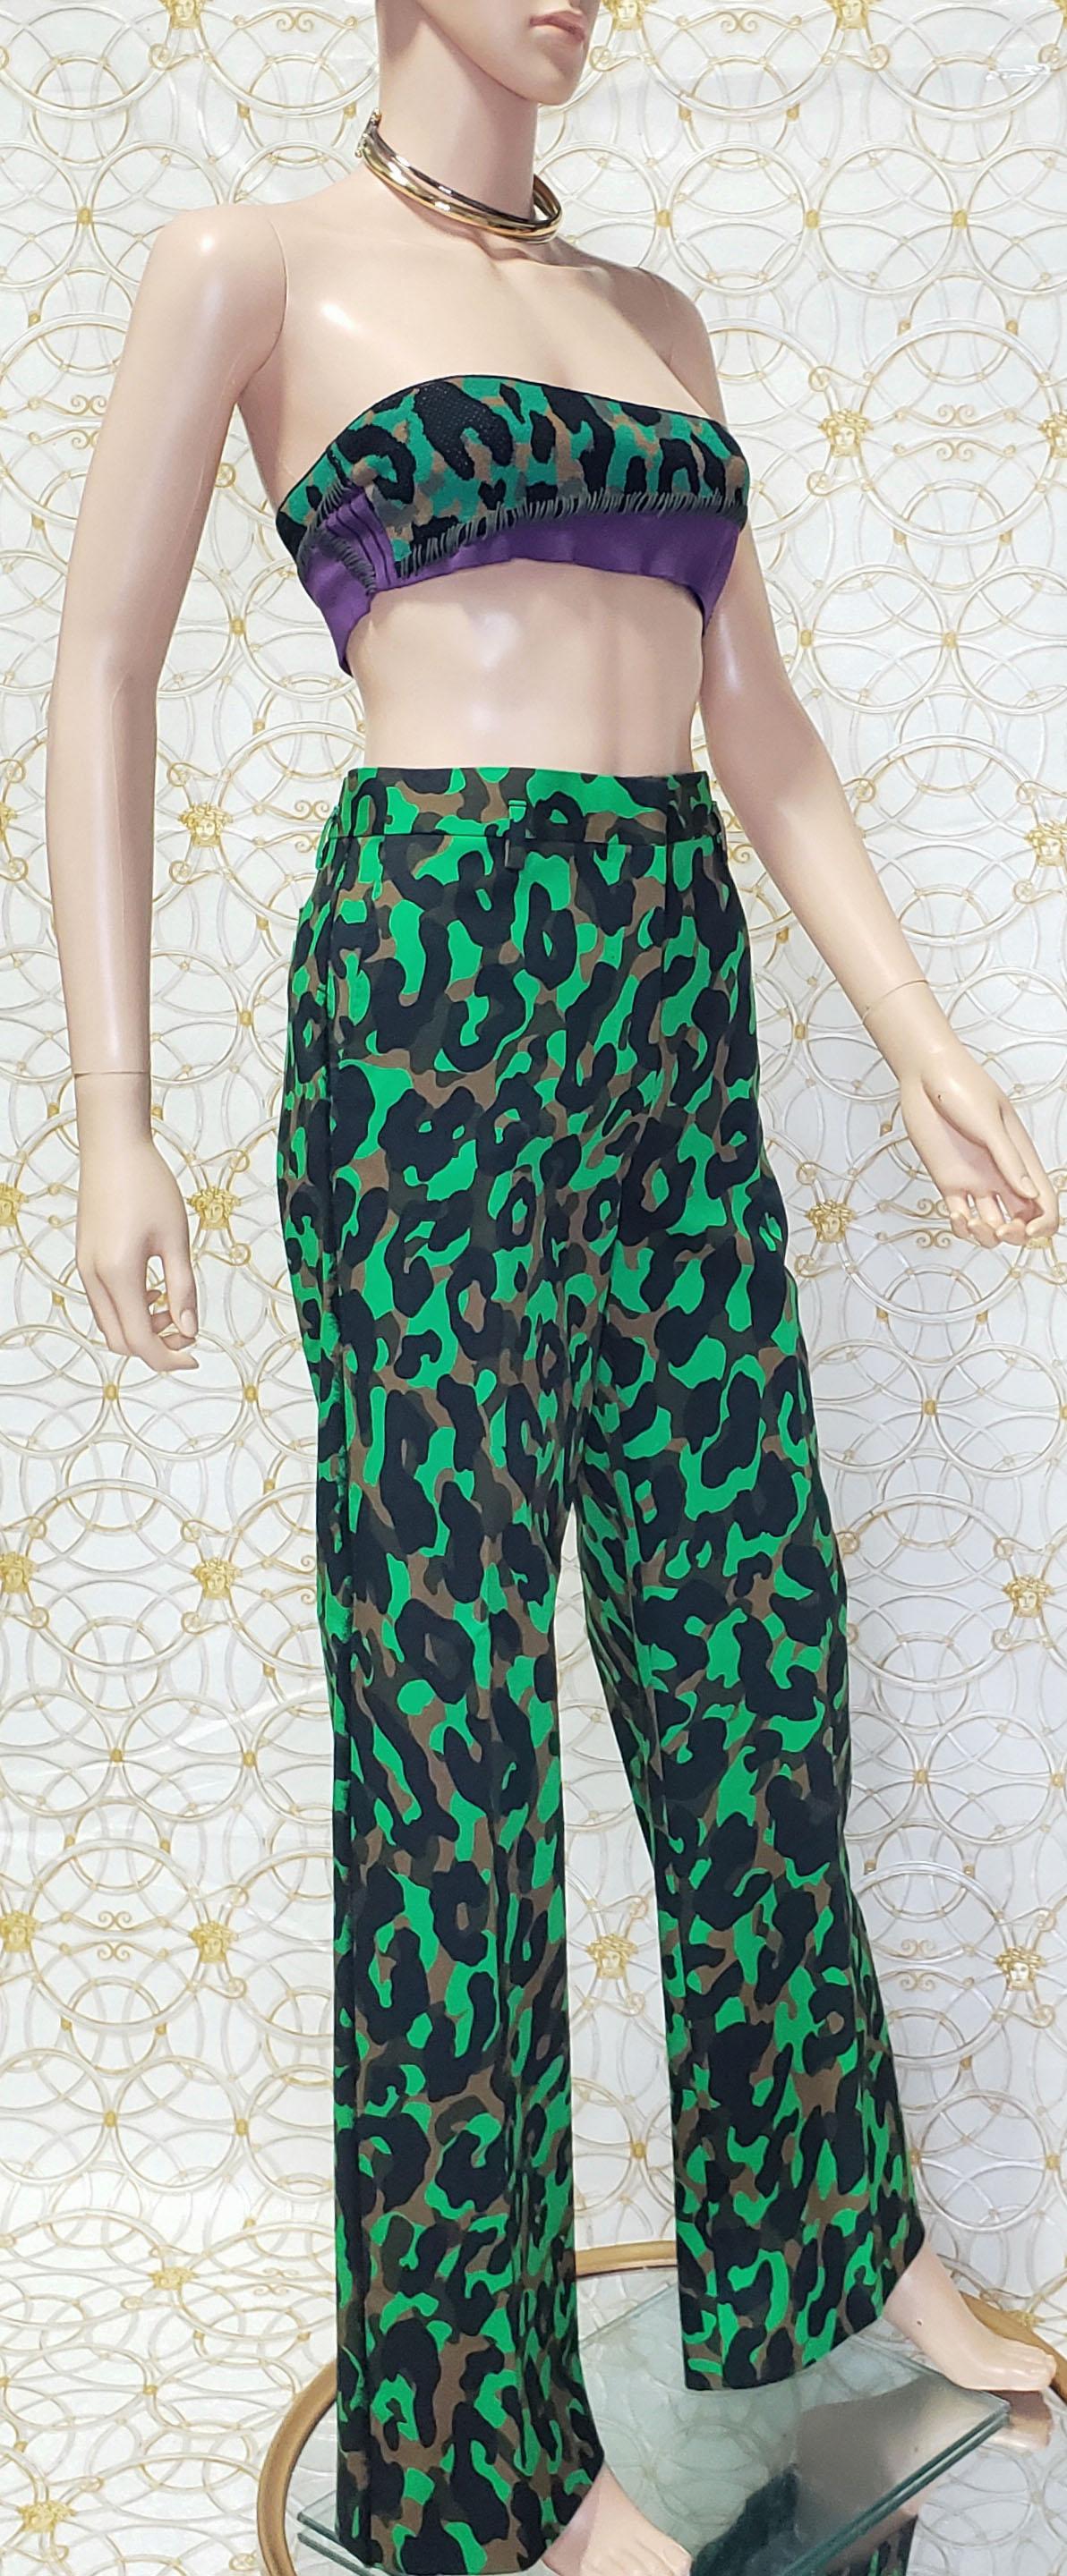 S/S 2016 Look # 13 VERSACE MILITARY CAMOUFLAGE PRINTED PANTS size 38 - 2 In New Condition For Sale In Montgomery, TX